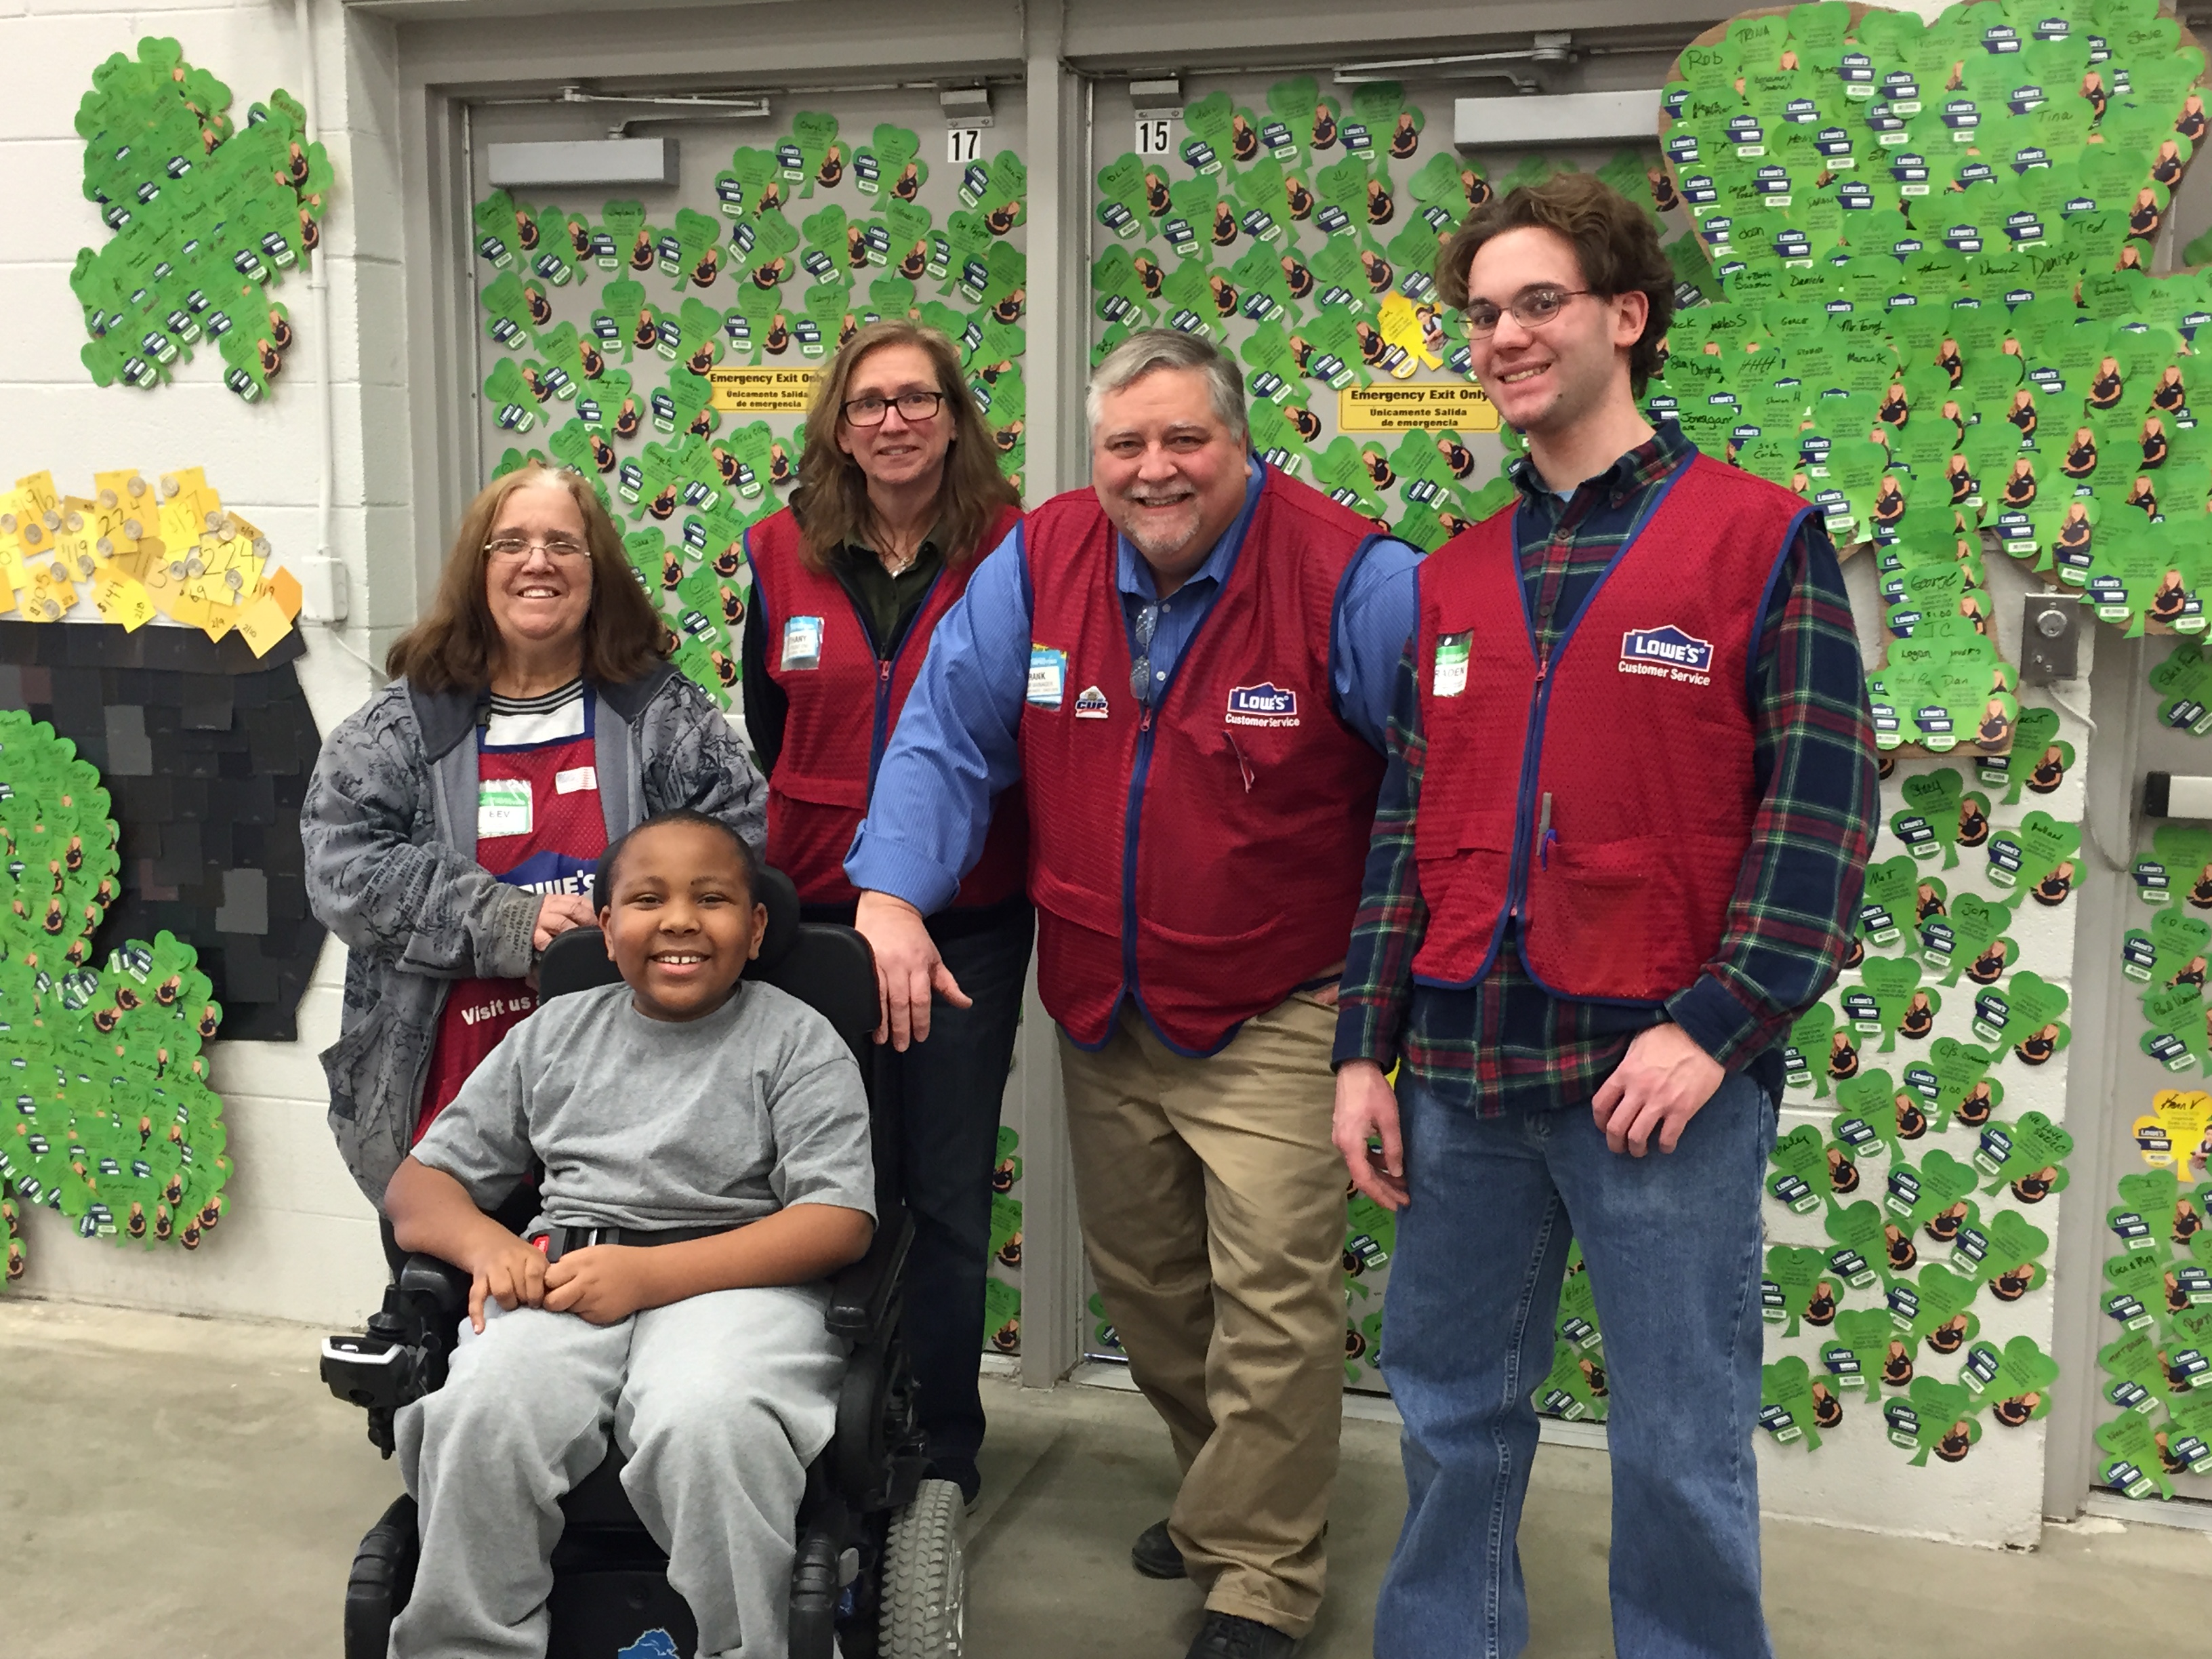 MDA Ambassador Torrance Johnson poses with employees from Lowe’s store 734 in Ypsilanti, Mich. in front of their special MDA Shamrock display.